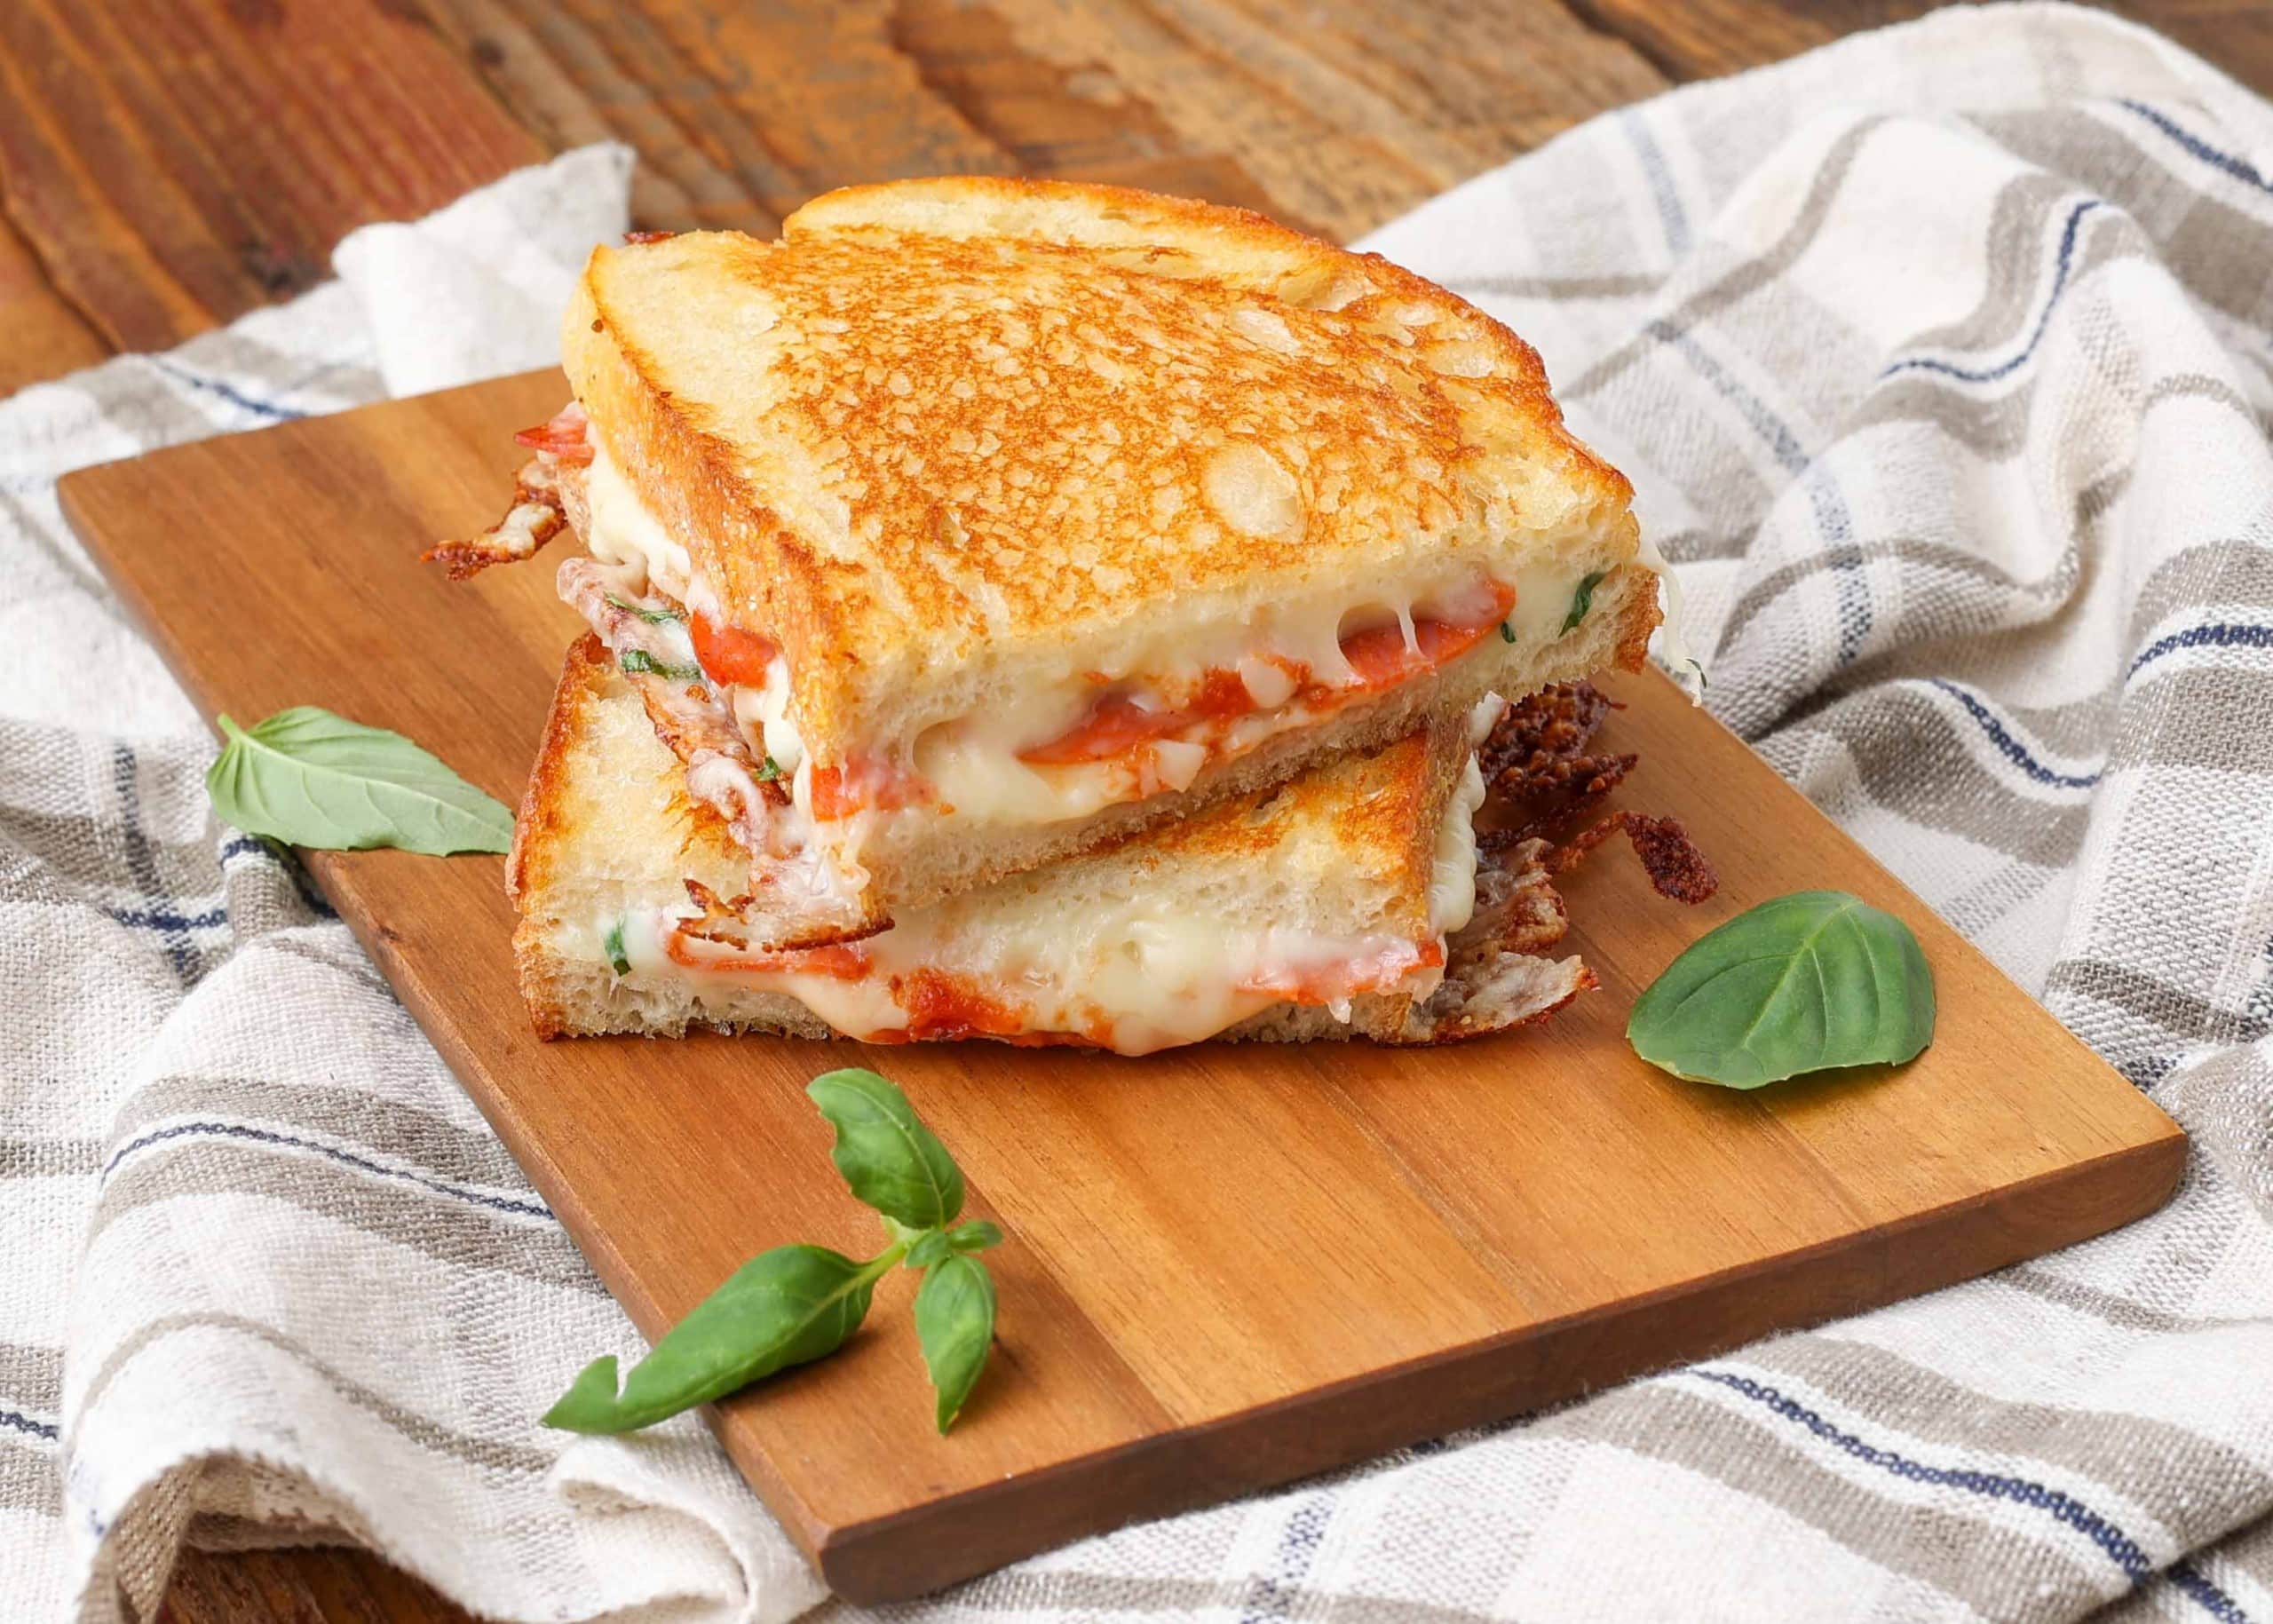 Pepperoni Pizza Grilled Sandwiches Recipe: How to Make It